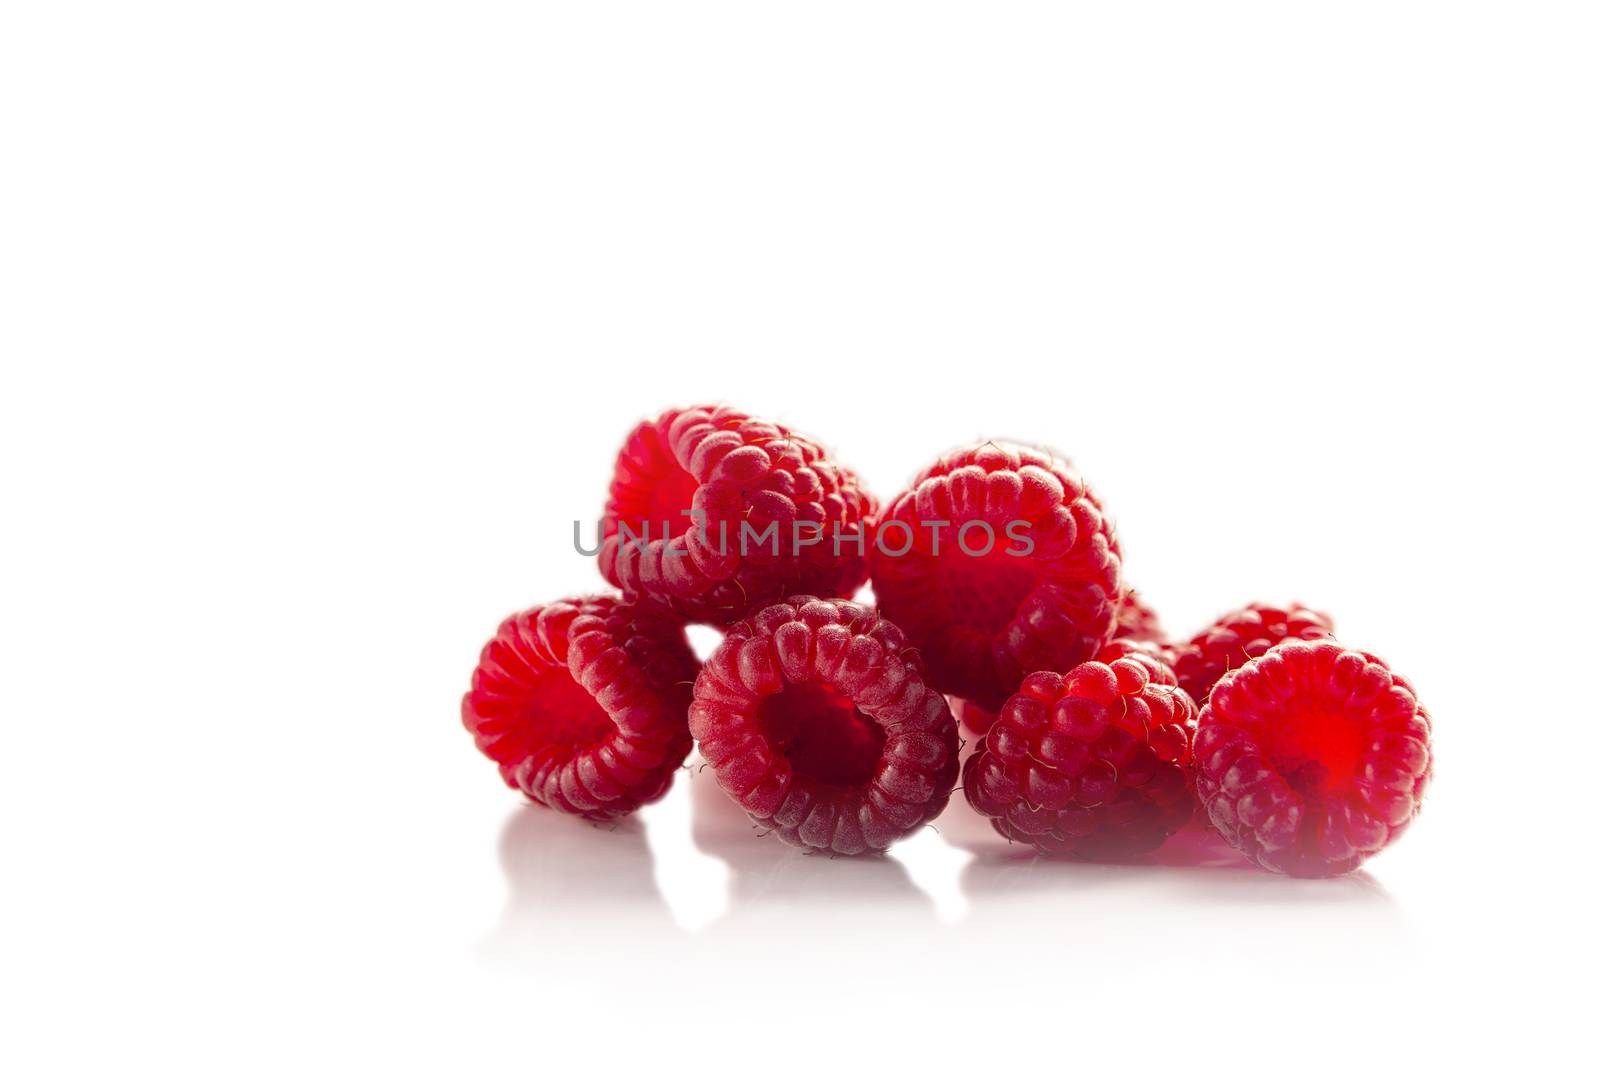 Raspberry fruit with reflection on white background by ben44